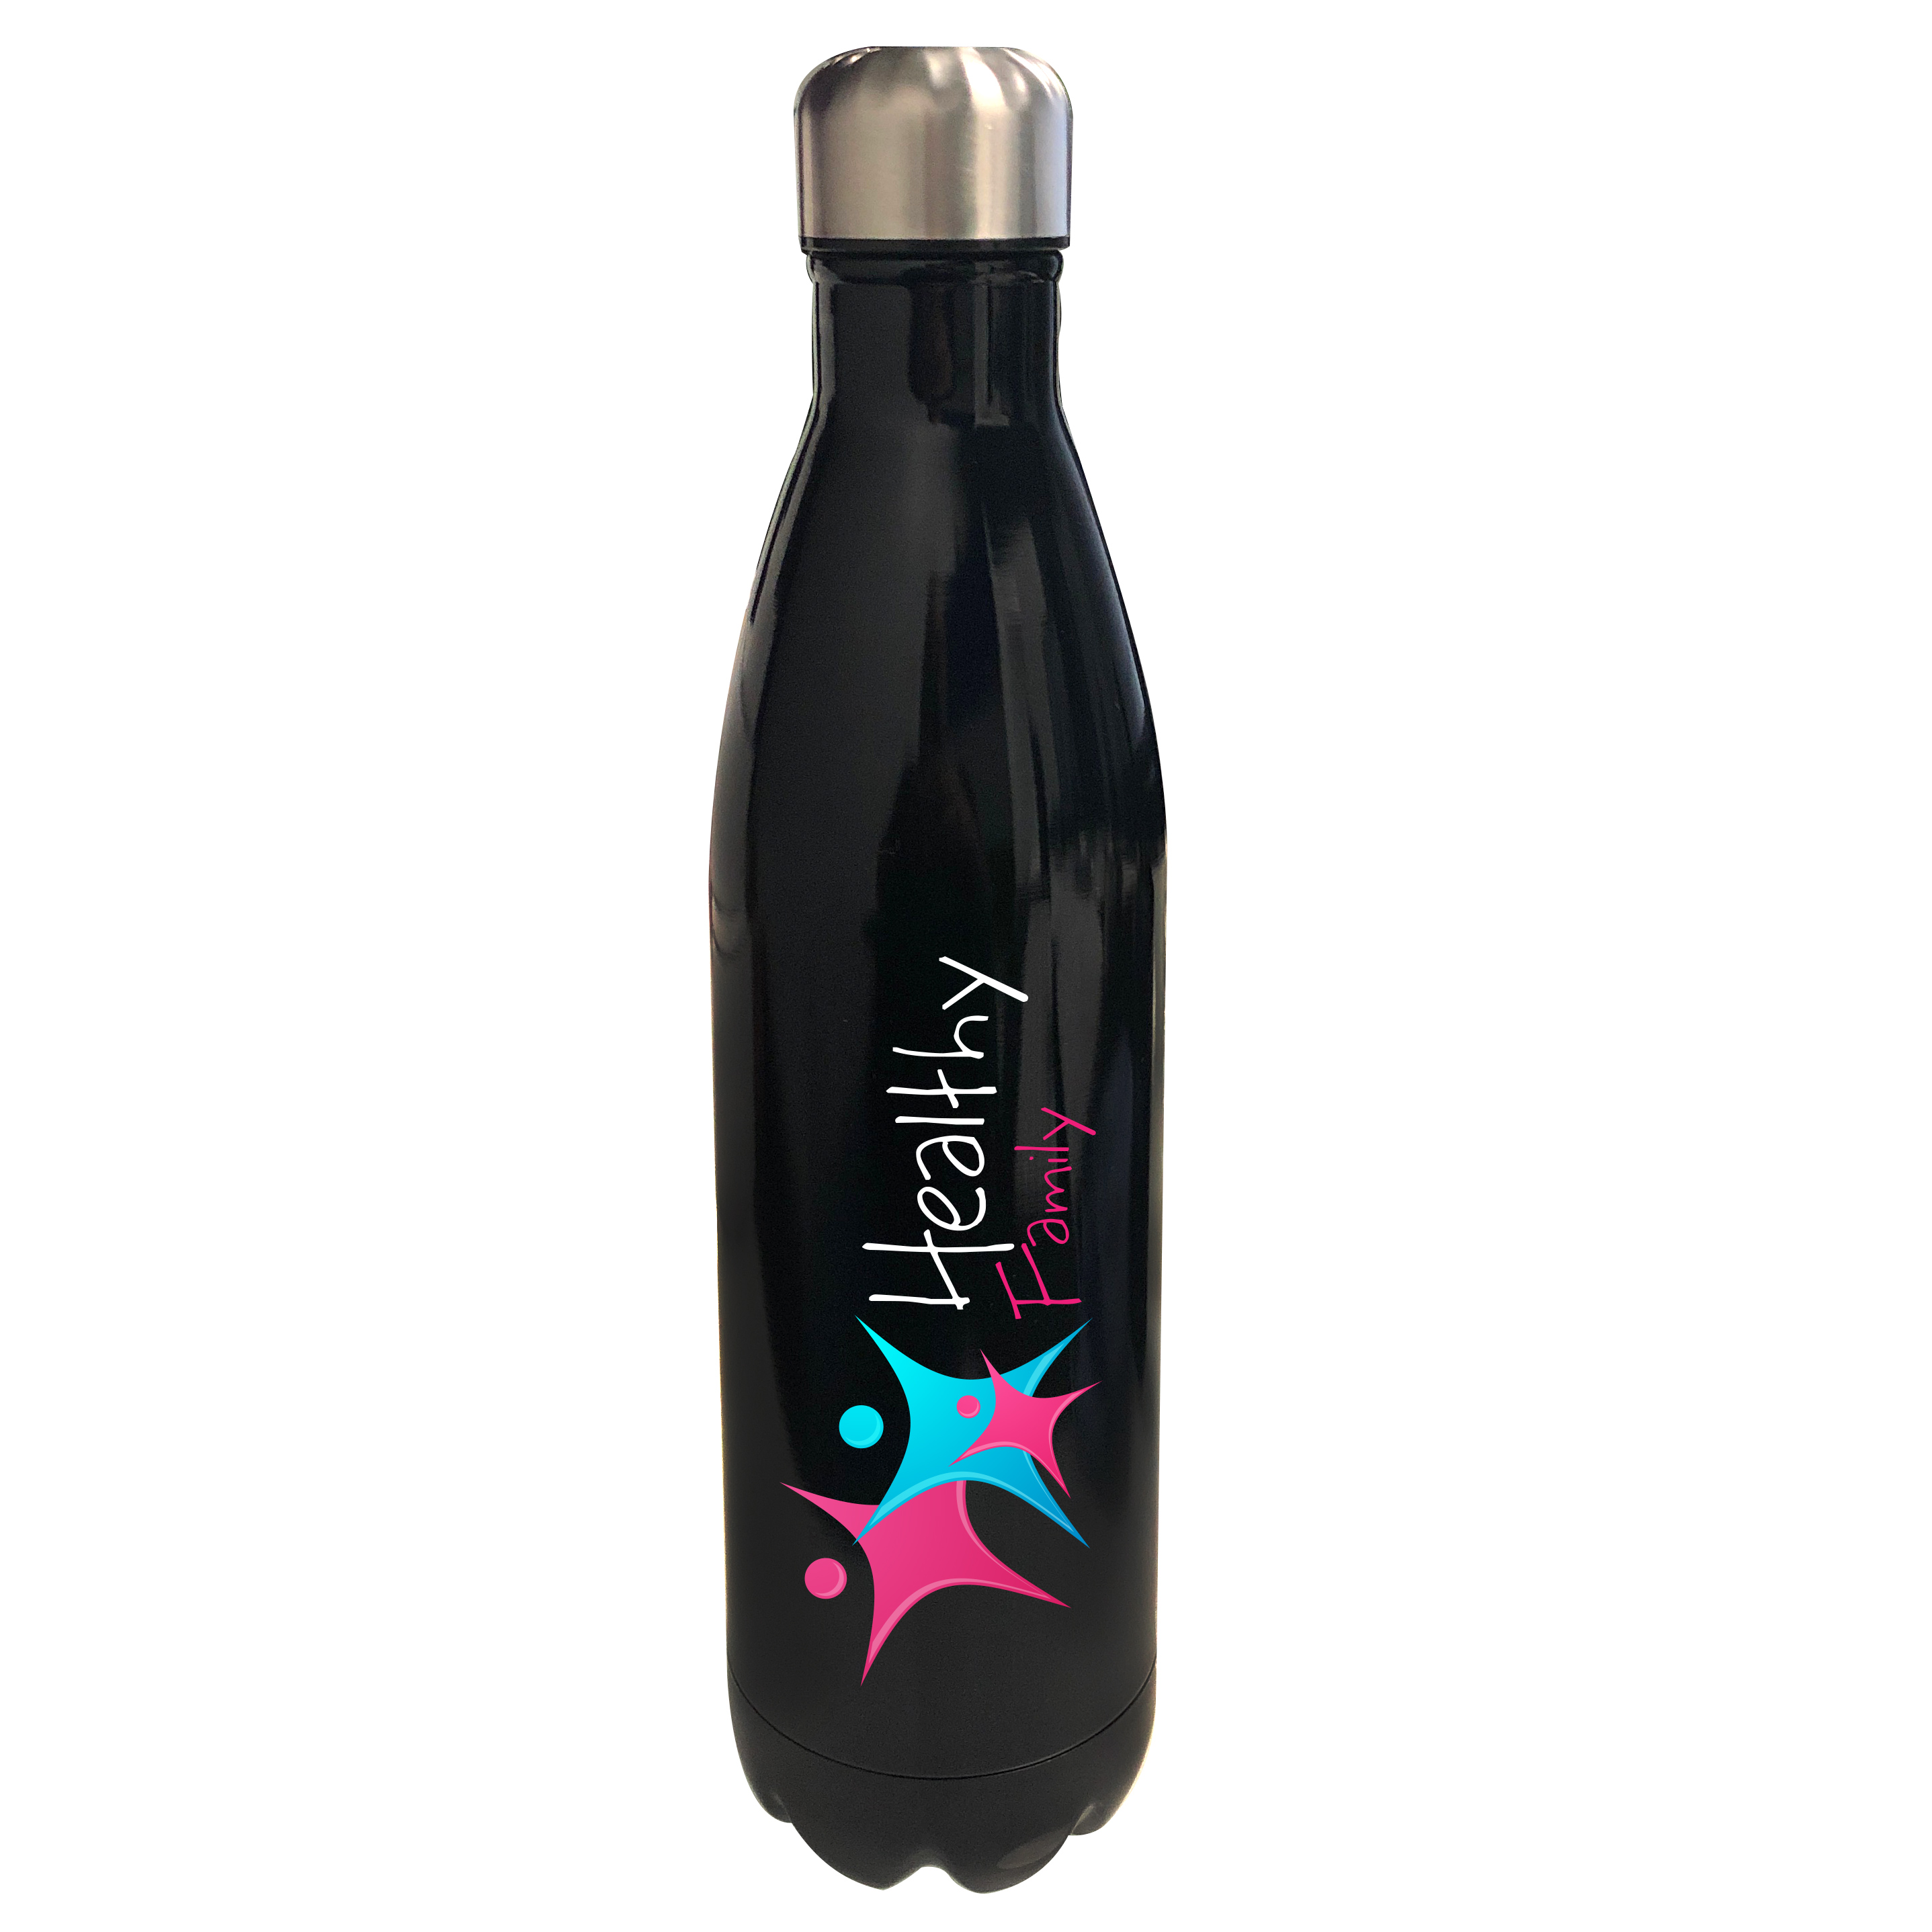 25oz Stainless Steel Cola Shaped Water Bottle - Black - Full Color Art/Text